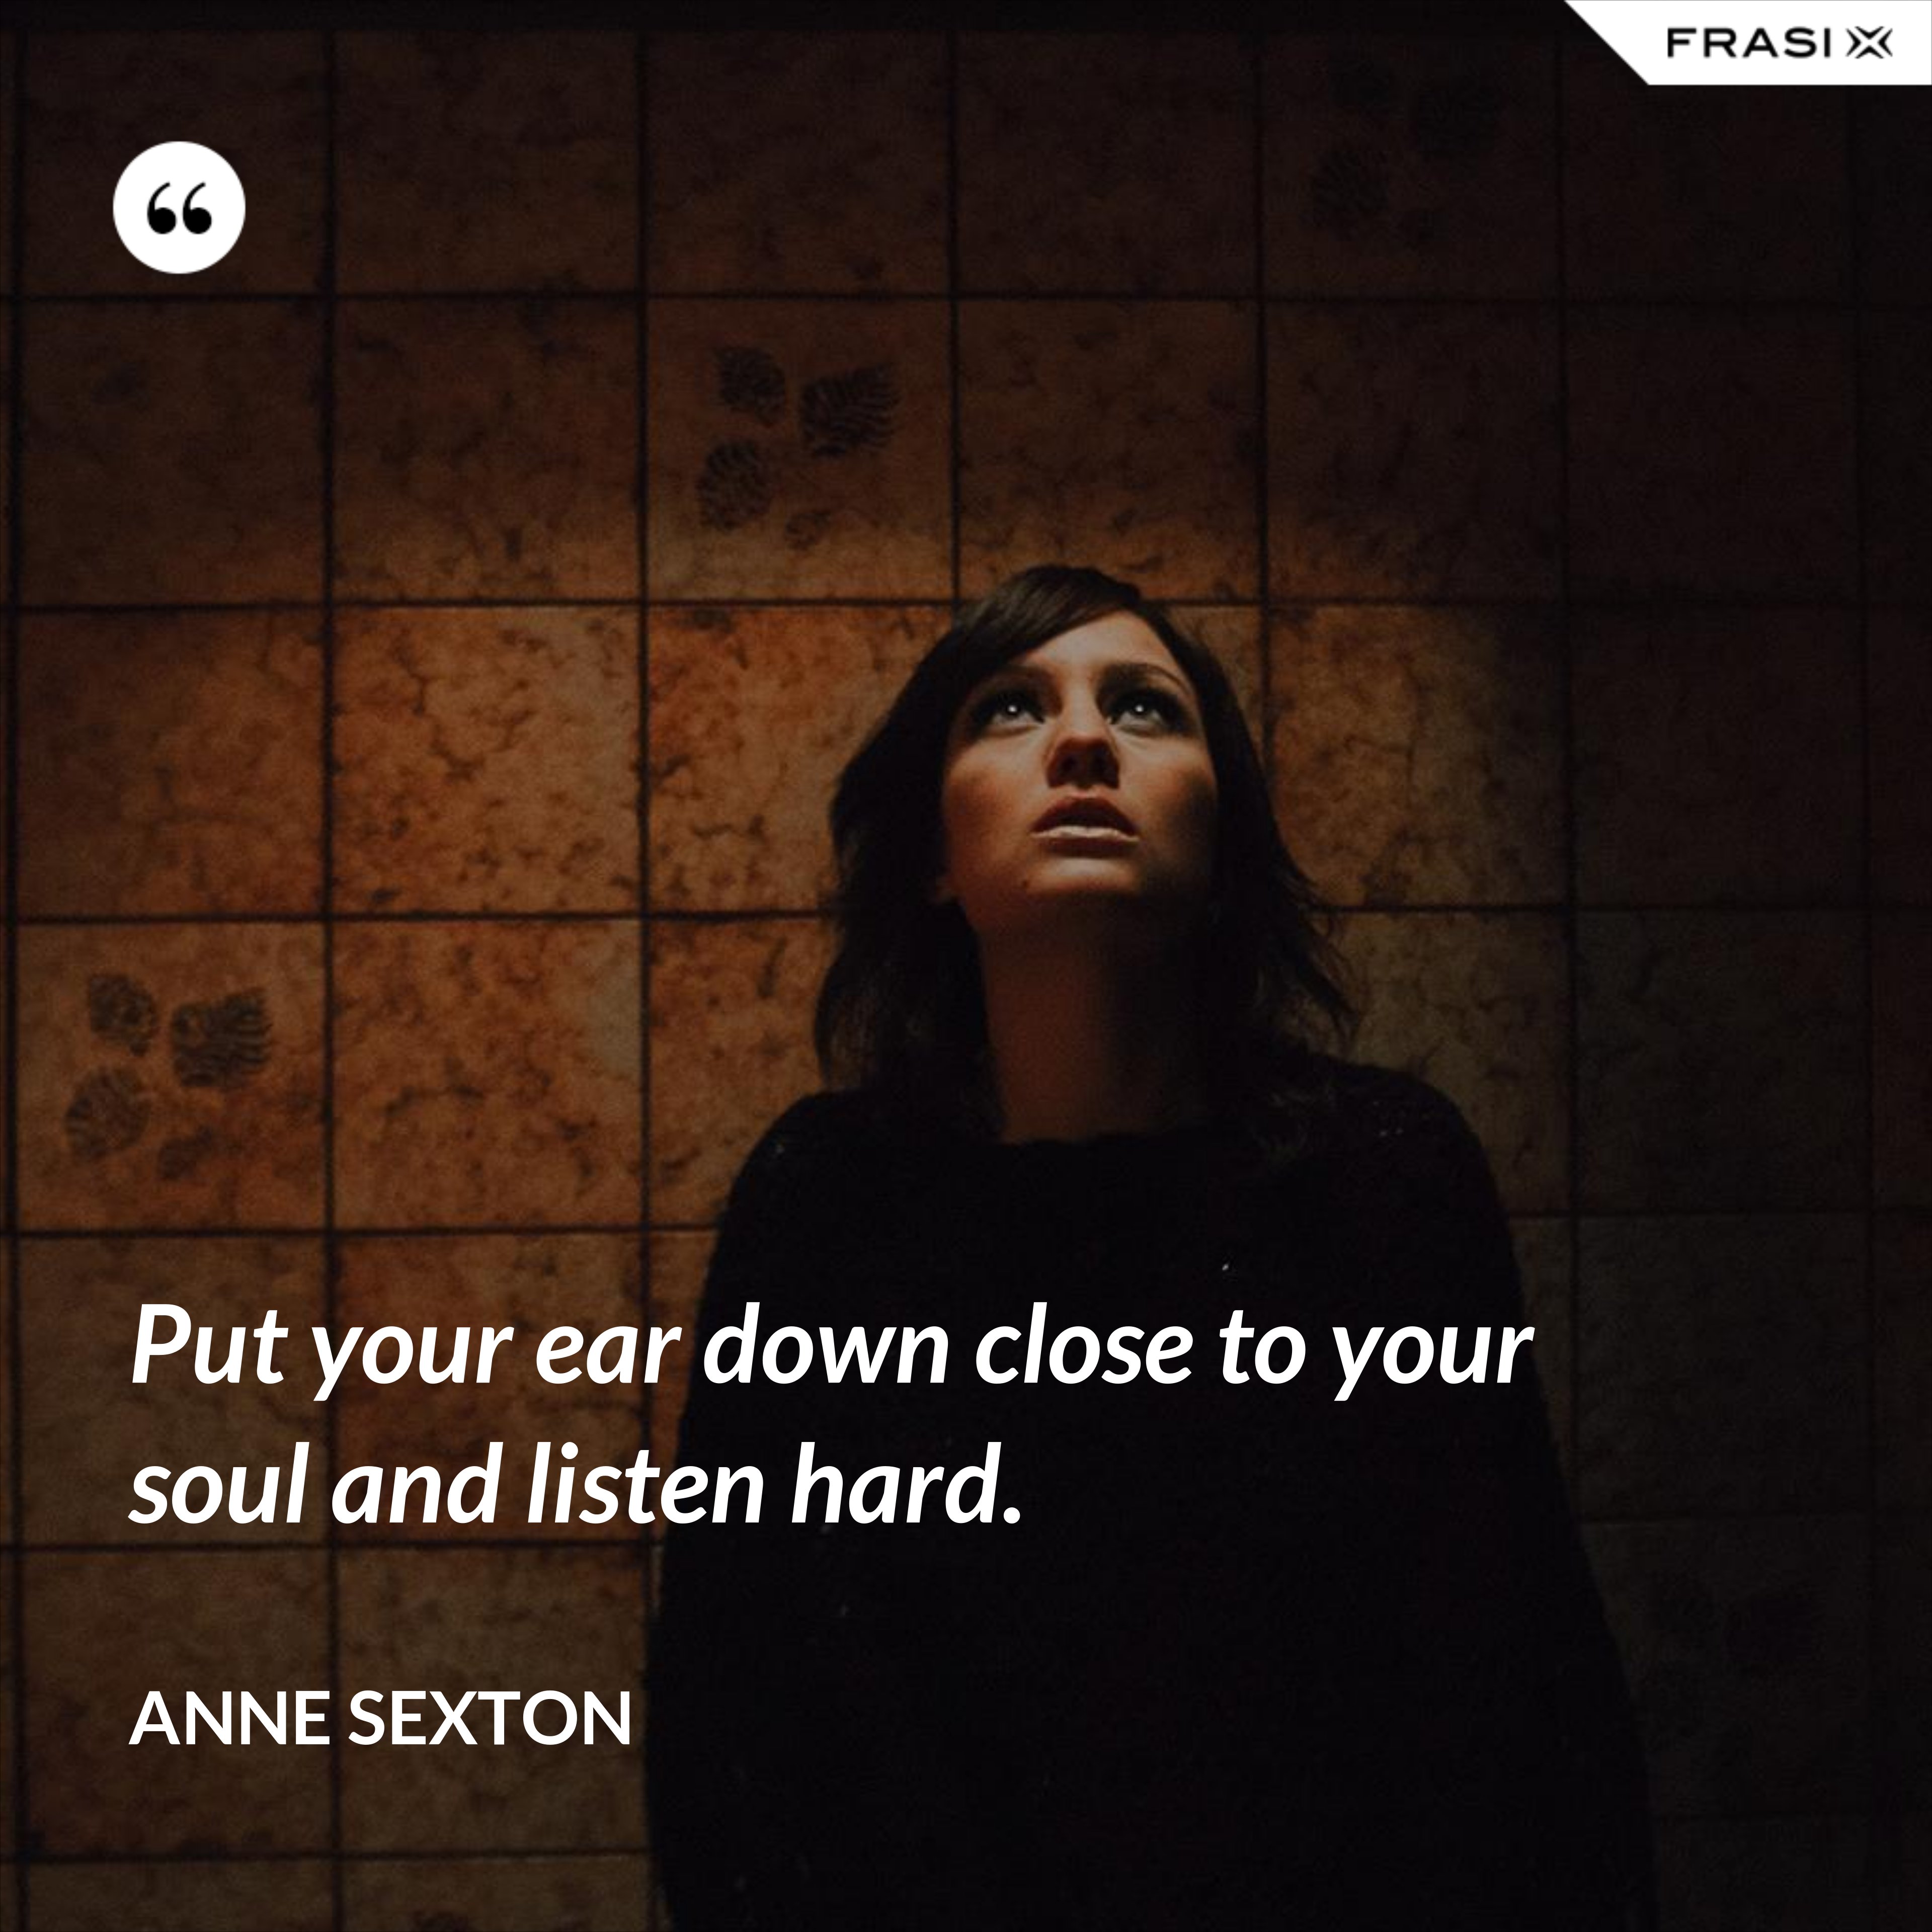 Put your ear down close to your soul and listen hard. - Anne Sexton